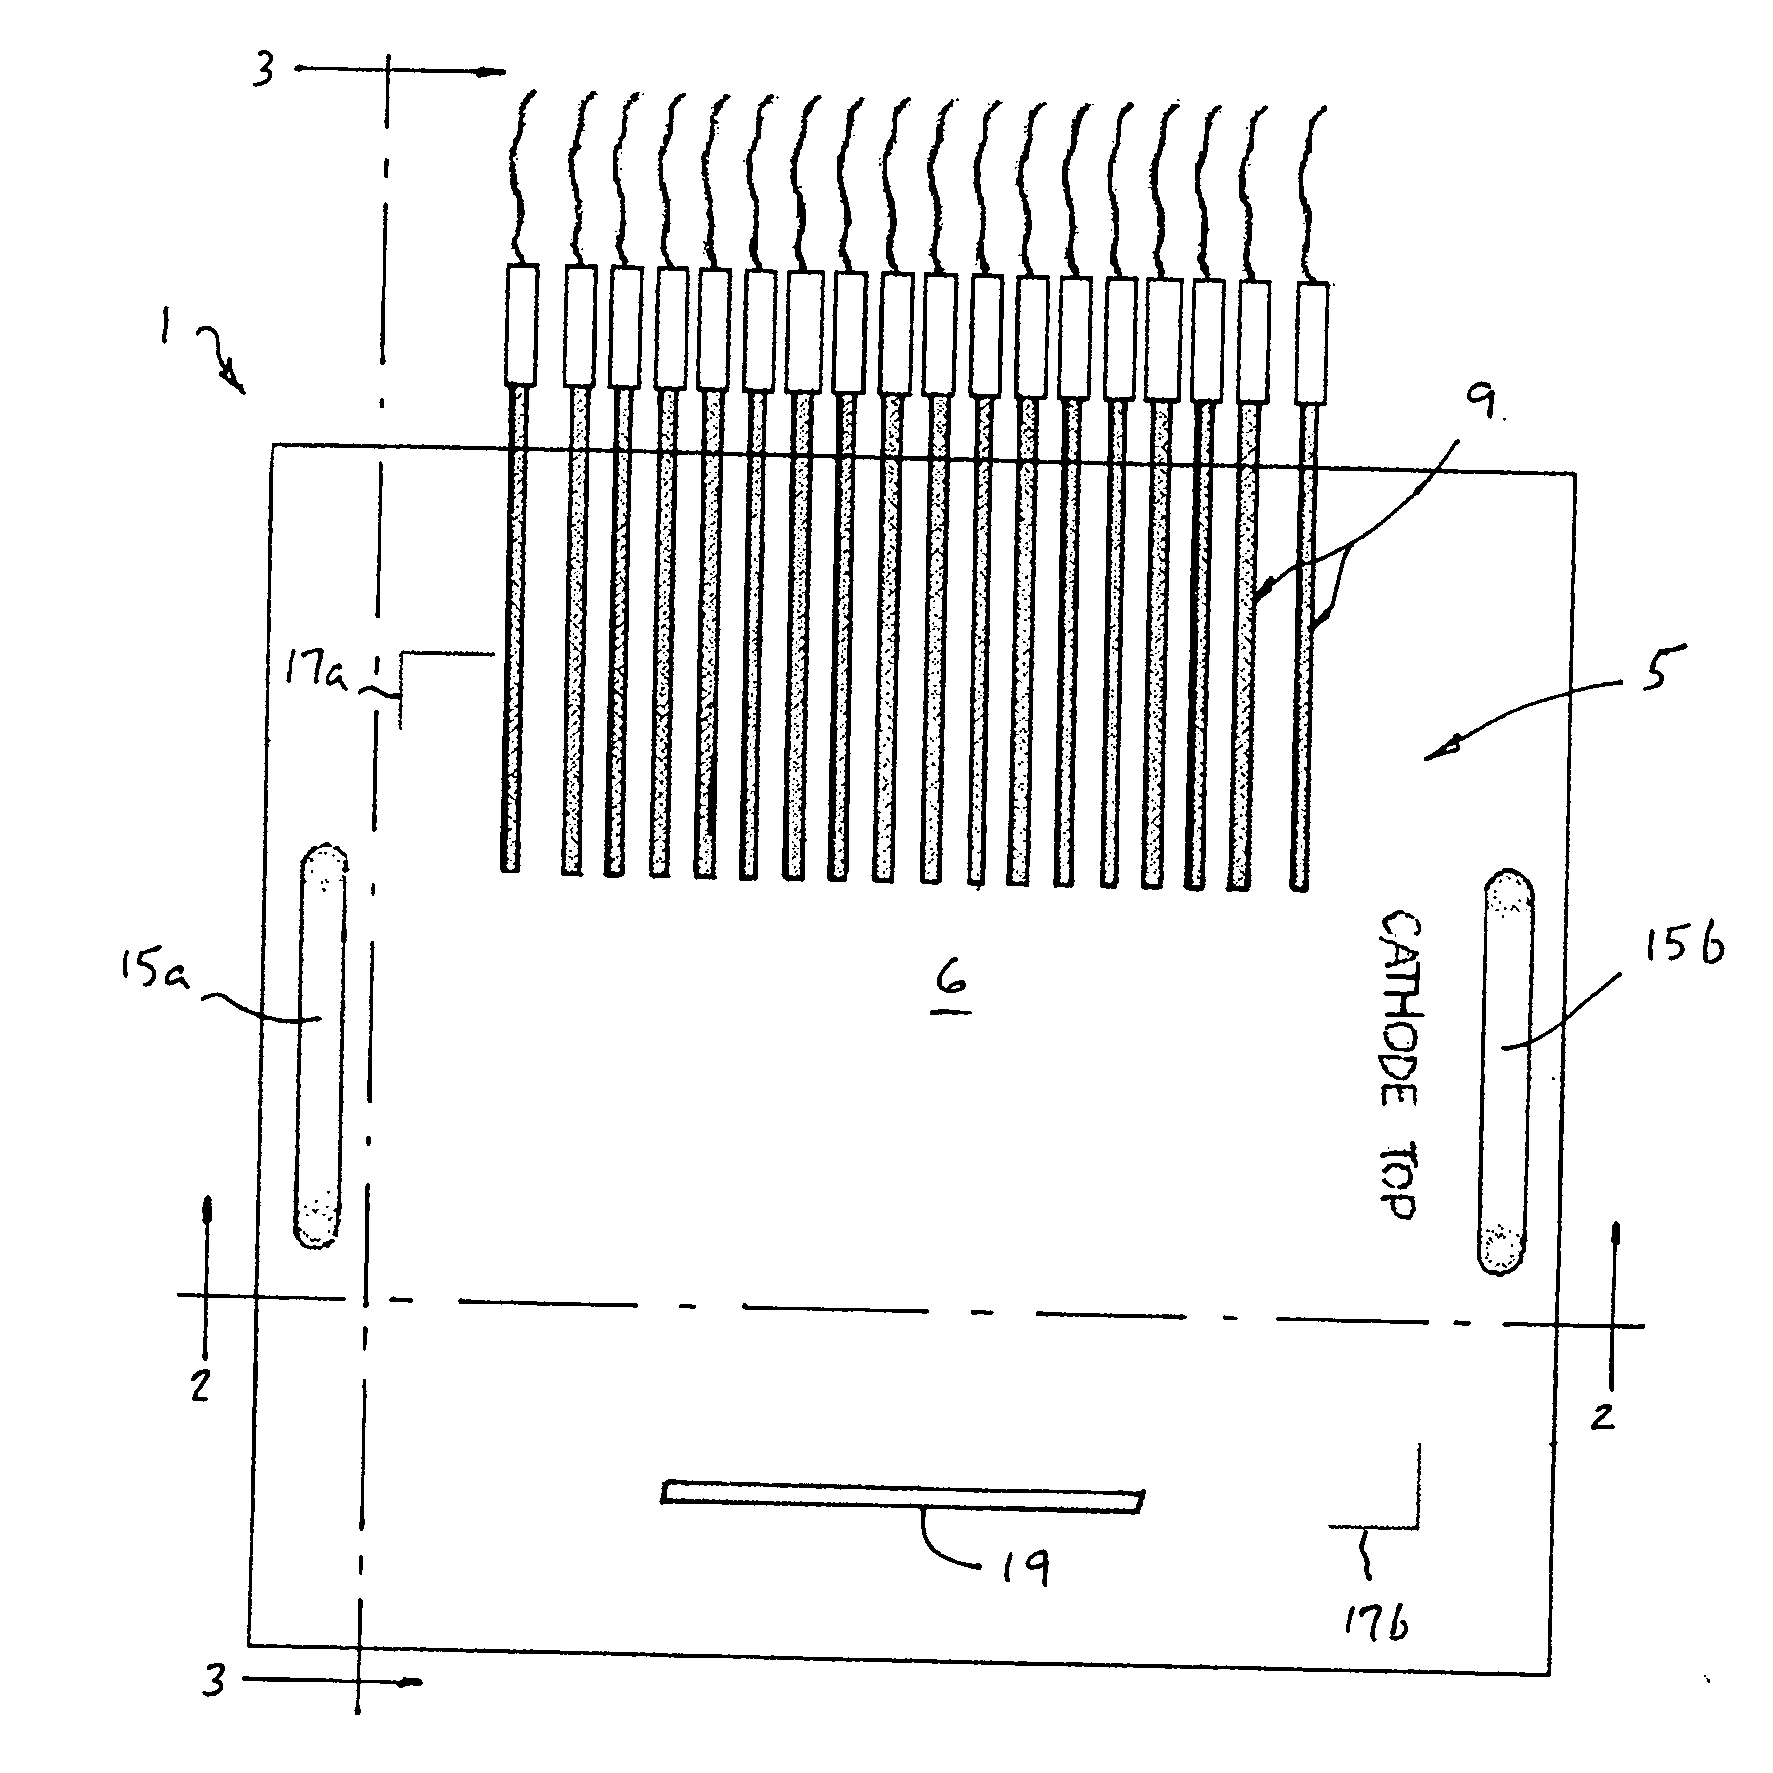 Circuit testing device for solid oxide fuel cell